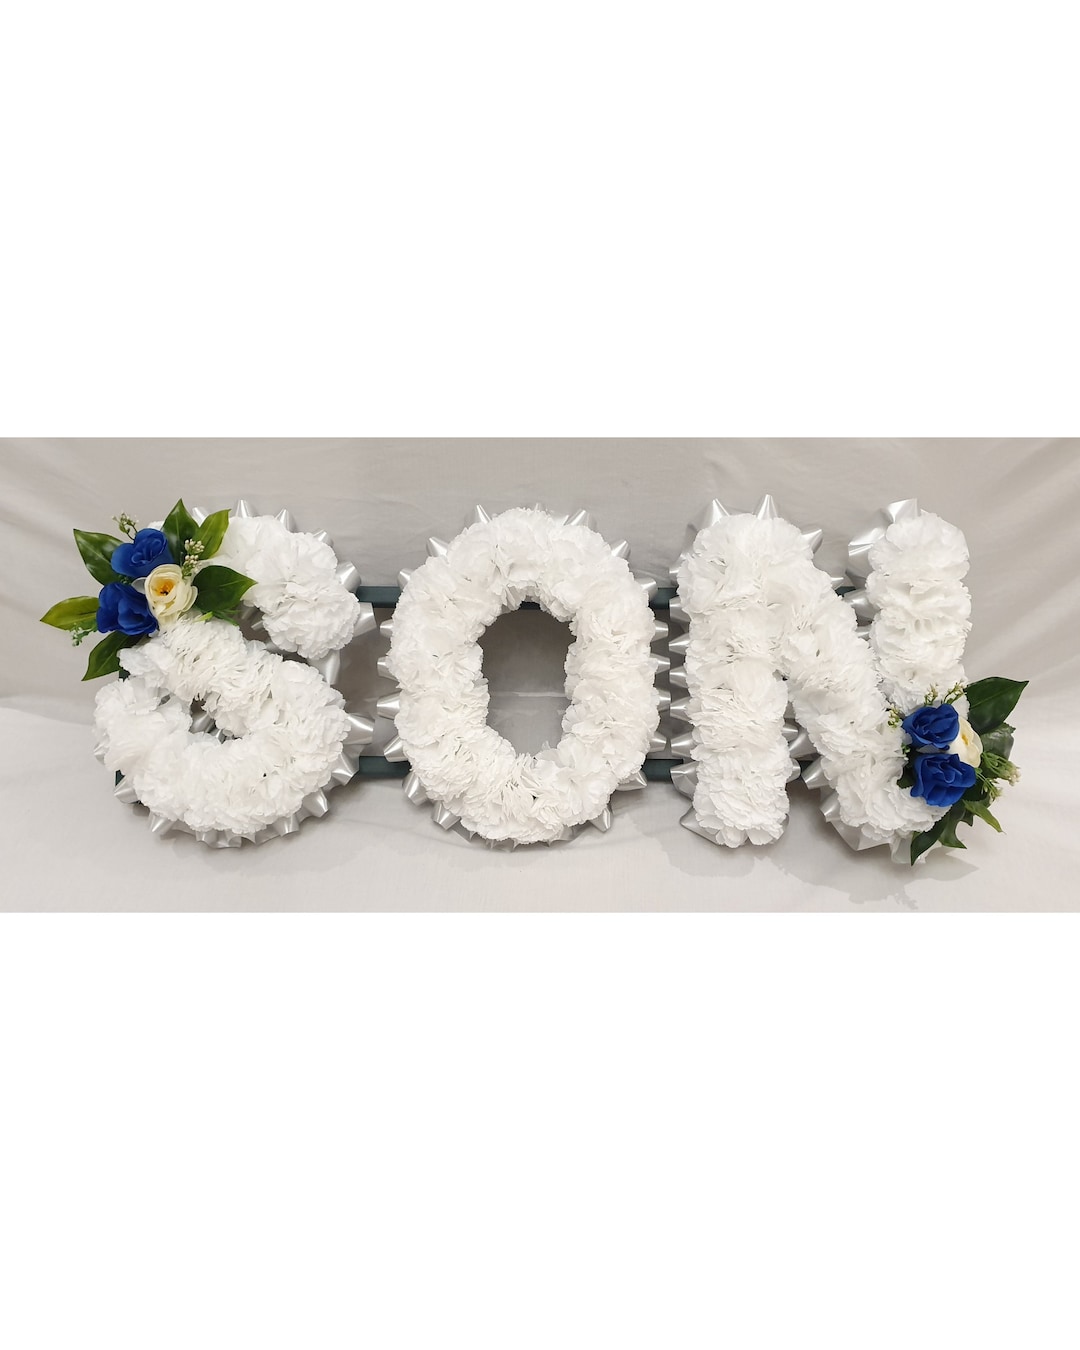 MOM FLOWER LETTER TRIBUTE FUNERAL FLOWERS in Suwanee, GA - Floral by  Victoria